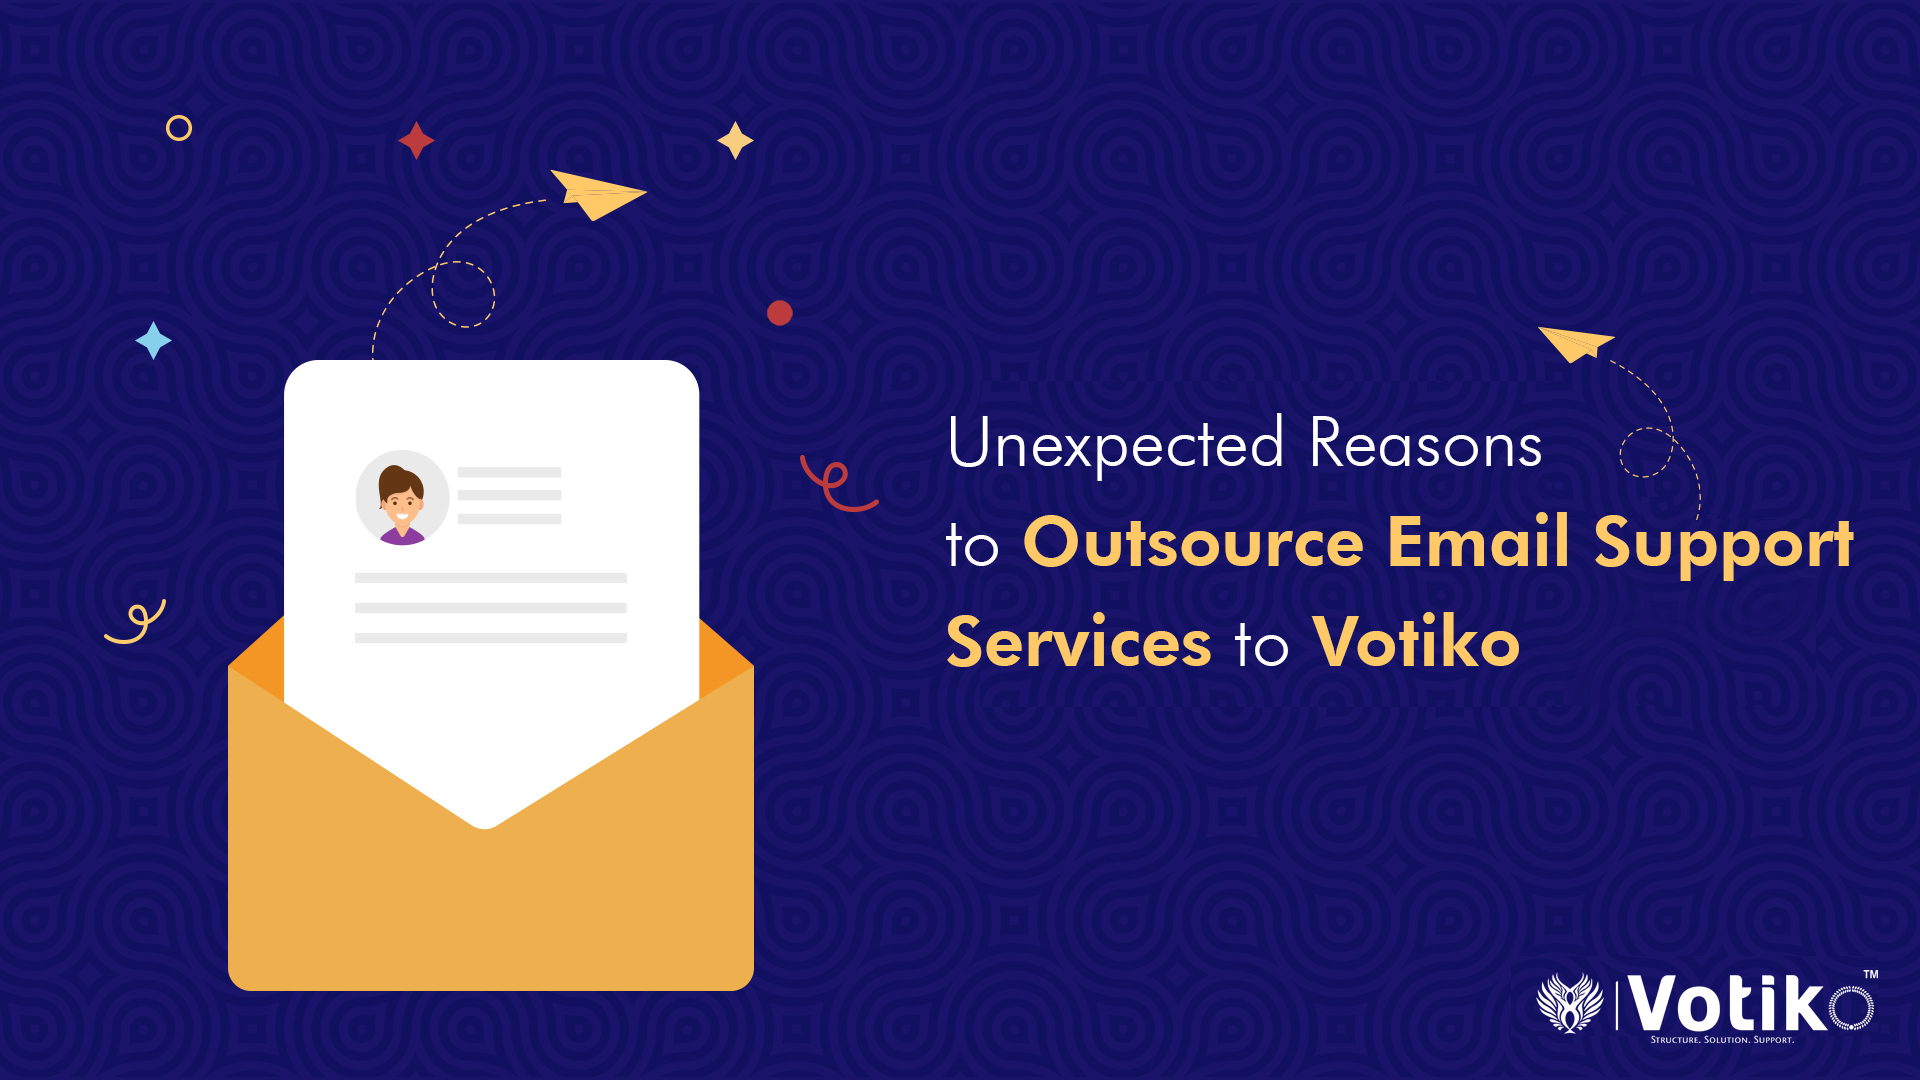 Unexpected Reasons to Outsource Email Support Services